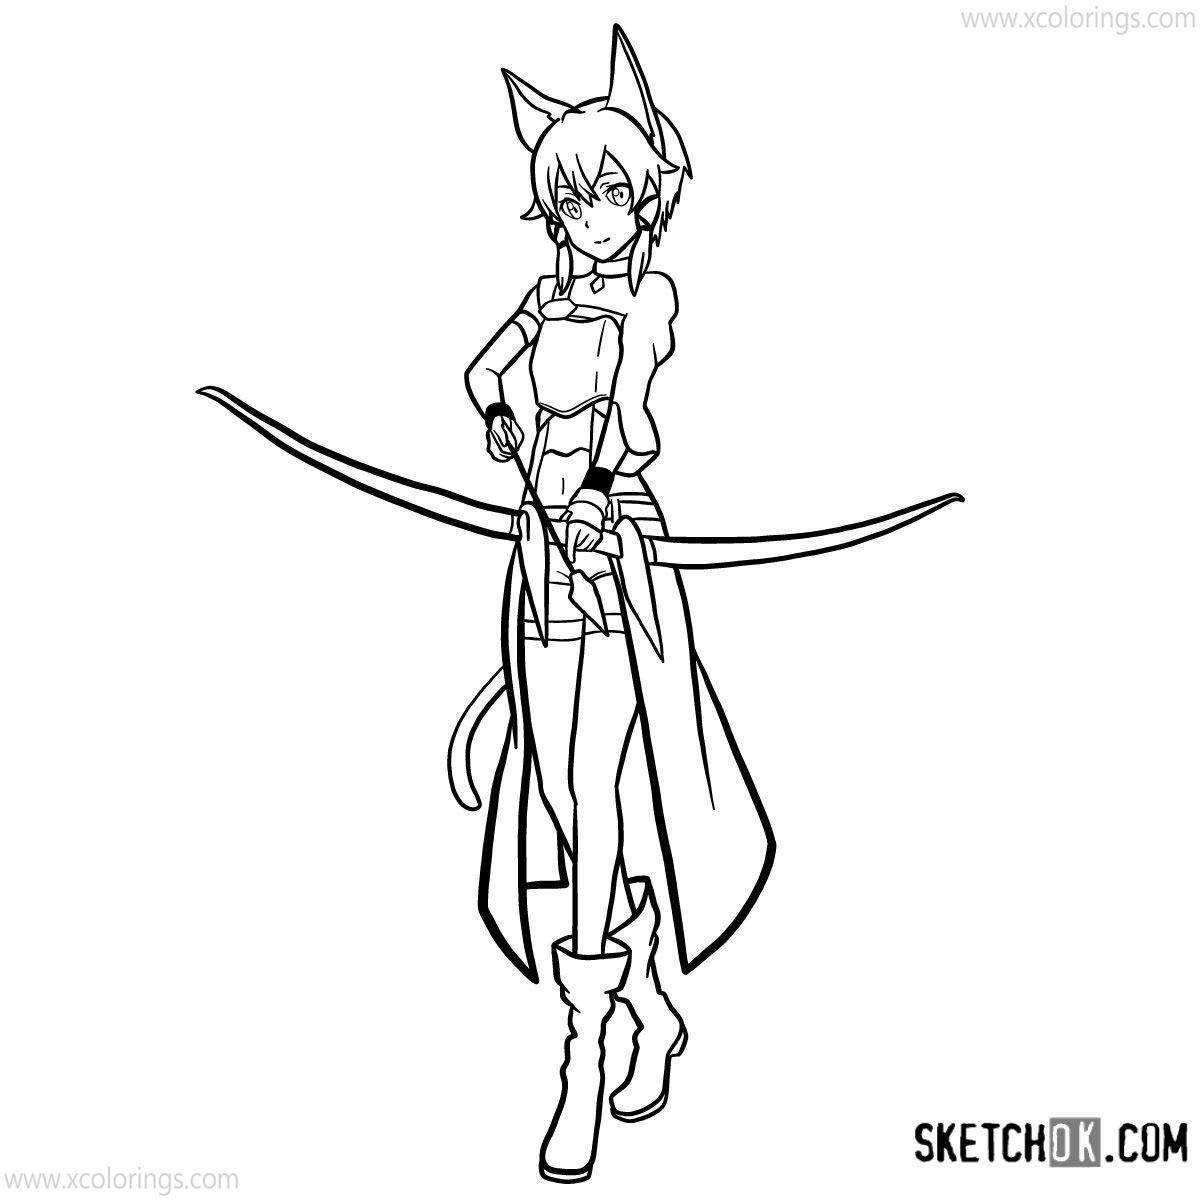 Free Sword Art Online Coloring Pages Sinon with Arch printable